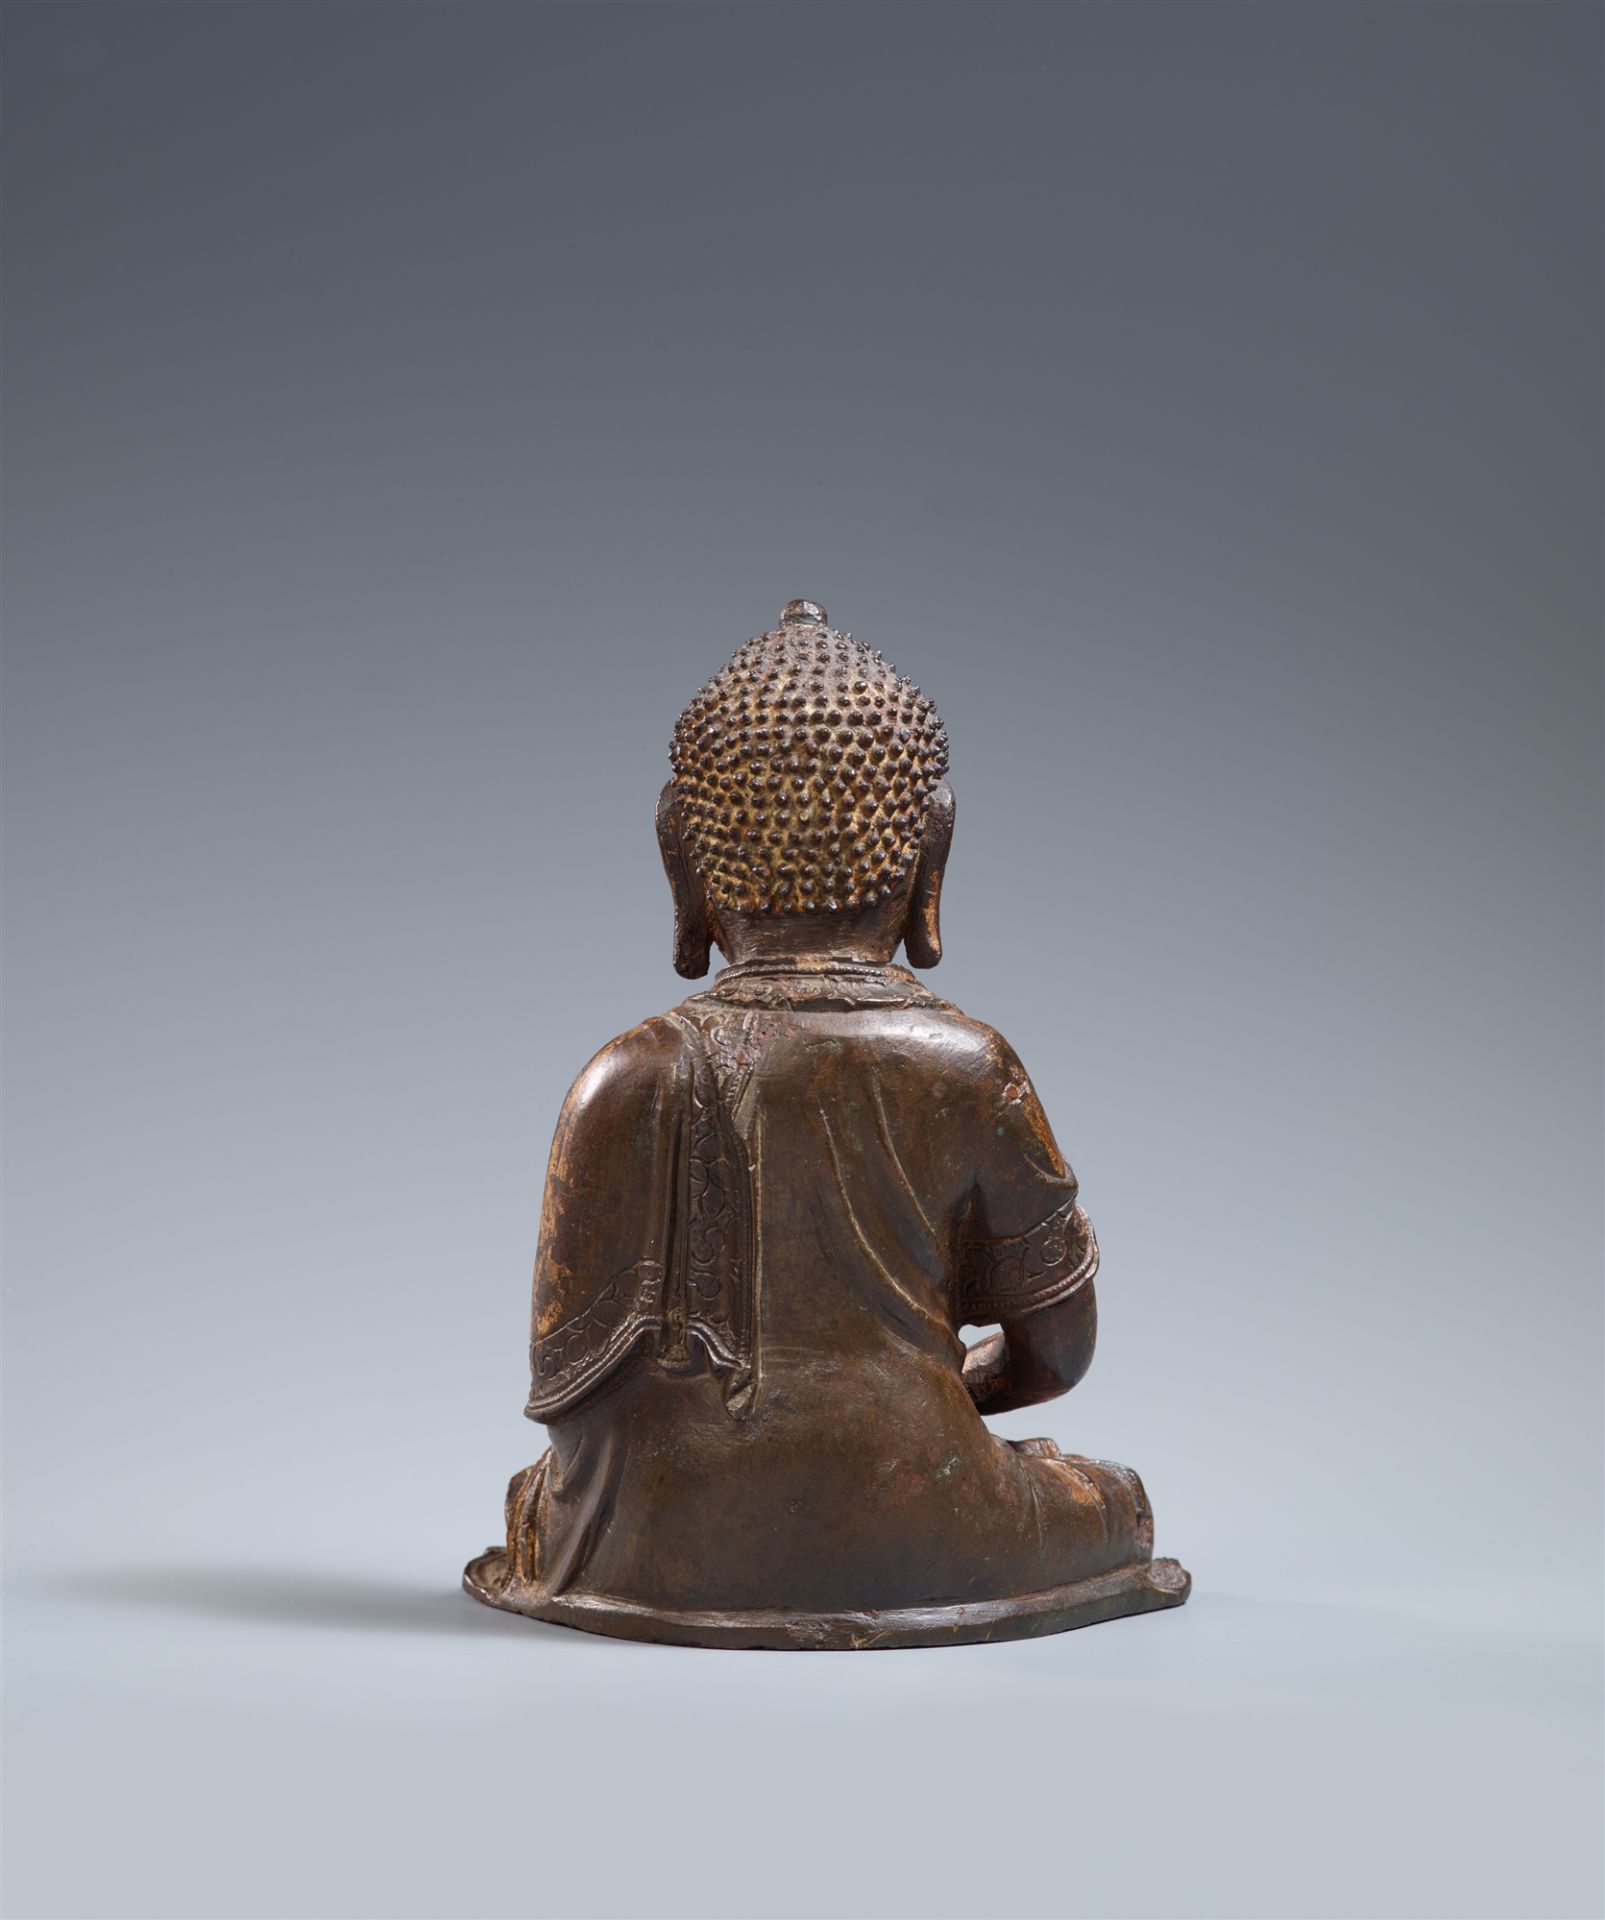 A small gilded and lacquered bronze figure of Buddha Shakyamuni. Ming dynasty, 16th century - Image 2 of 2